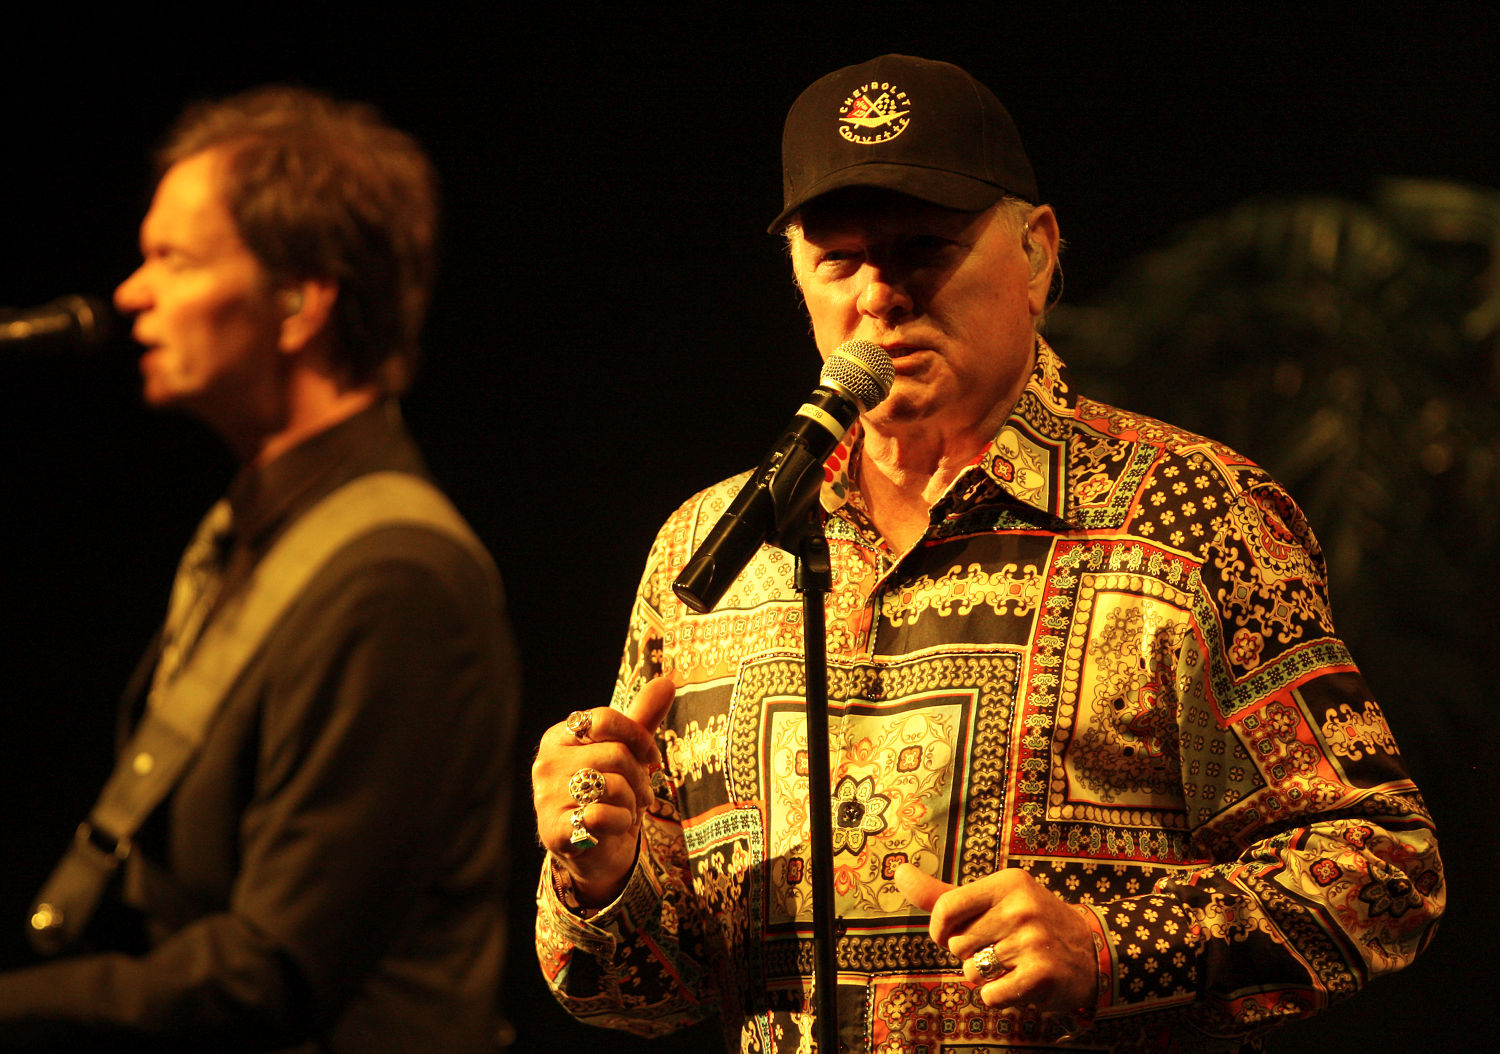 Original band member Mike Love (right) and The Beach Boys perform at the Mississippi Moon Bar inside Diamond Jo Casino on Saturday. PHOTO CREDIT: Nicki Kohl